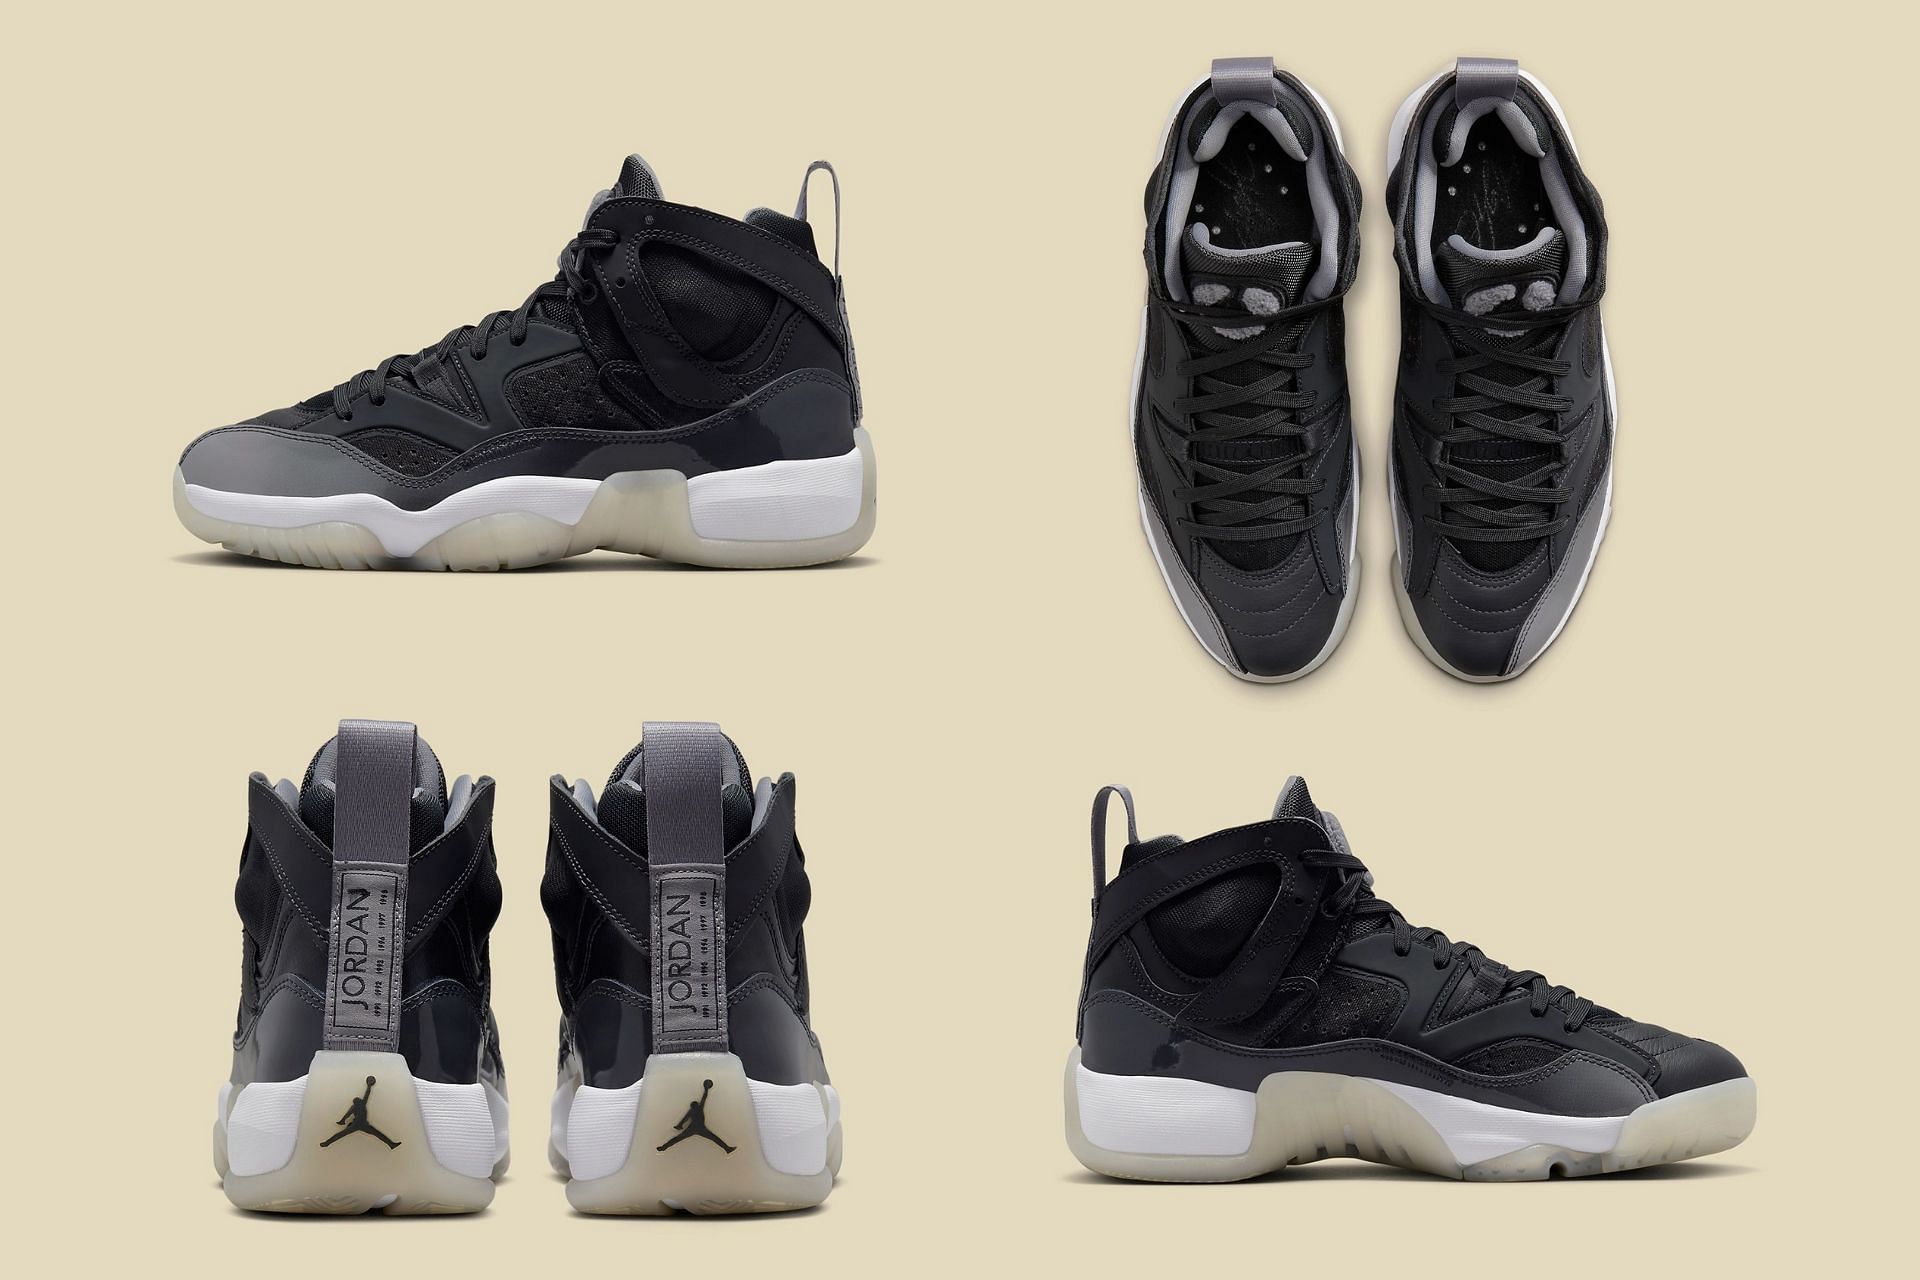 Where to buy Jordan Two Trey Black/Grey shoes? Price and more details ...